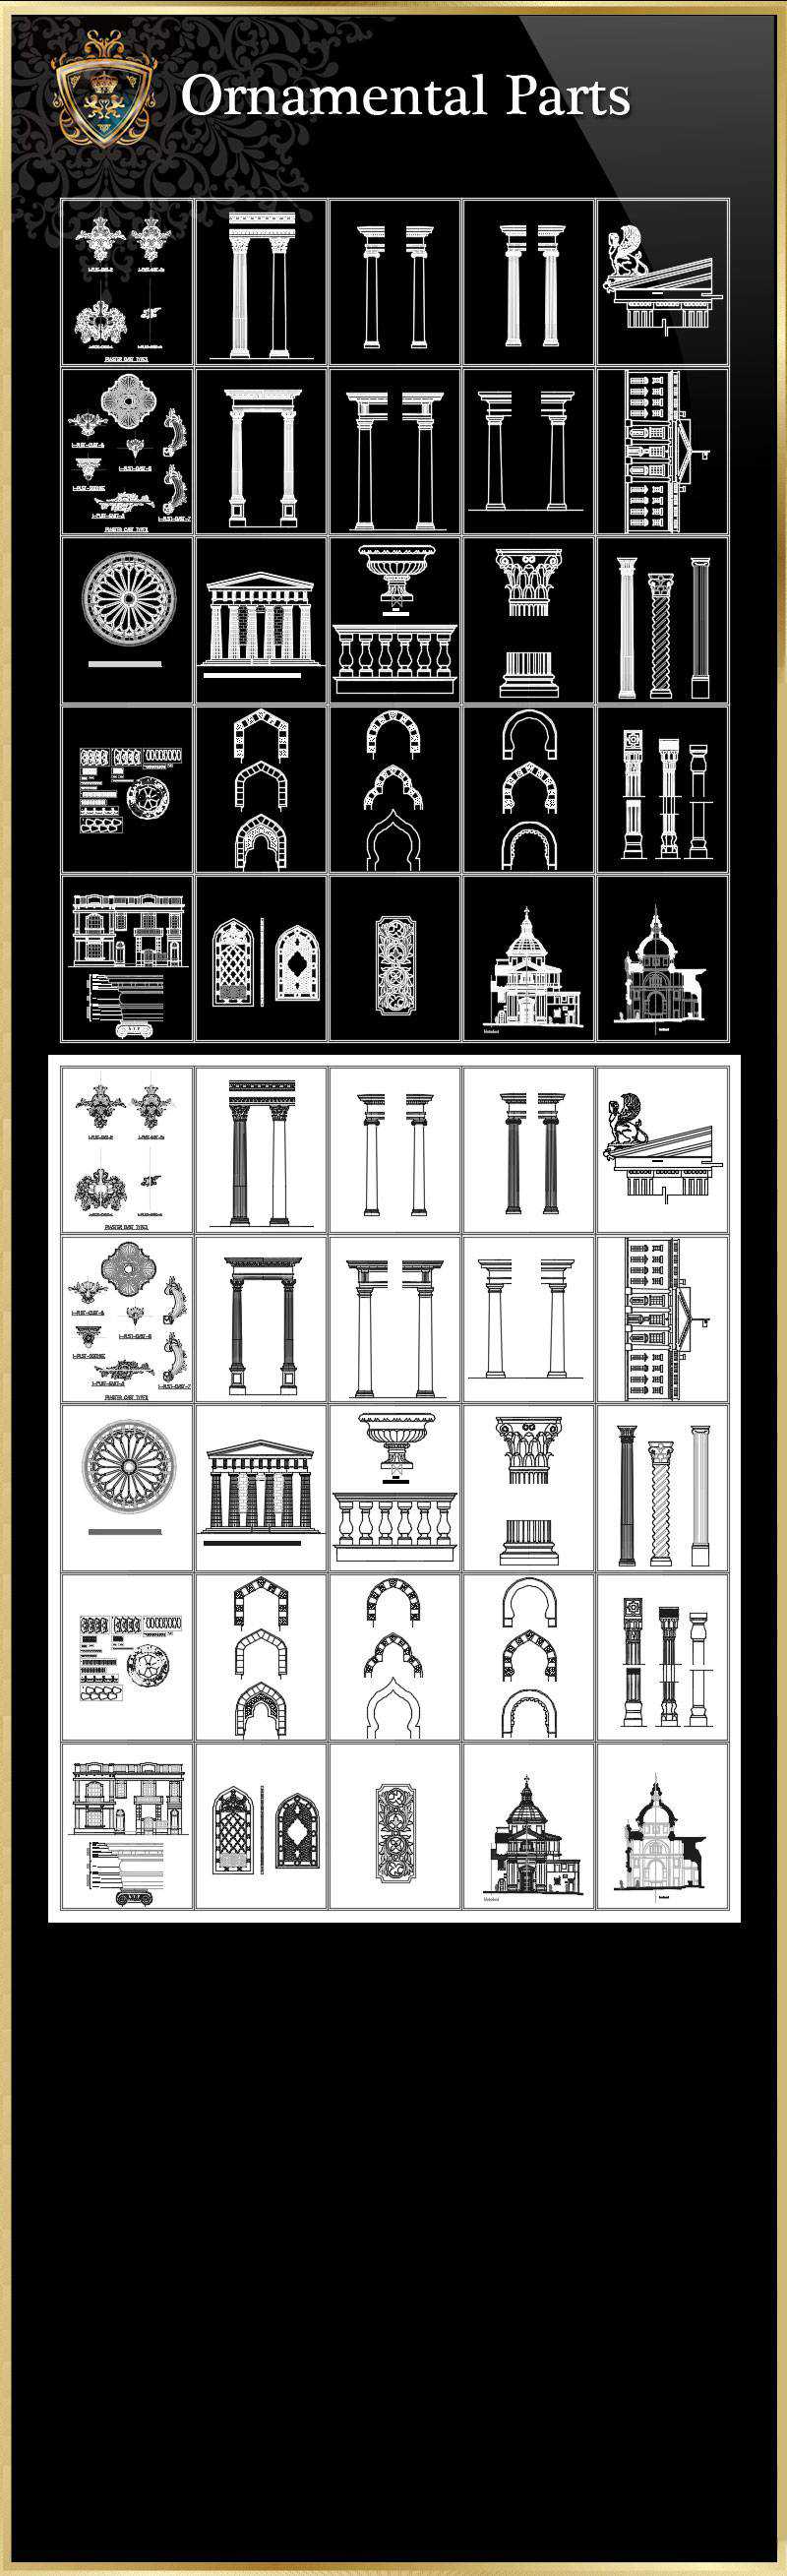 ★【Ornamental Parts of Buildings 2】Luxury home, Luxury Villas, Luxury Palace, Architecture Ornamental Parts, Decorative Inserts & Accessories, Handrail & Stairway Parts, Outdoor House Accessories, Euro Architectural Components, Arcade